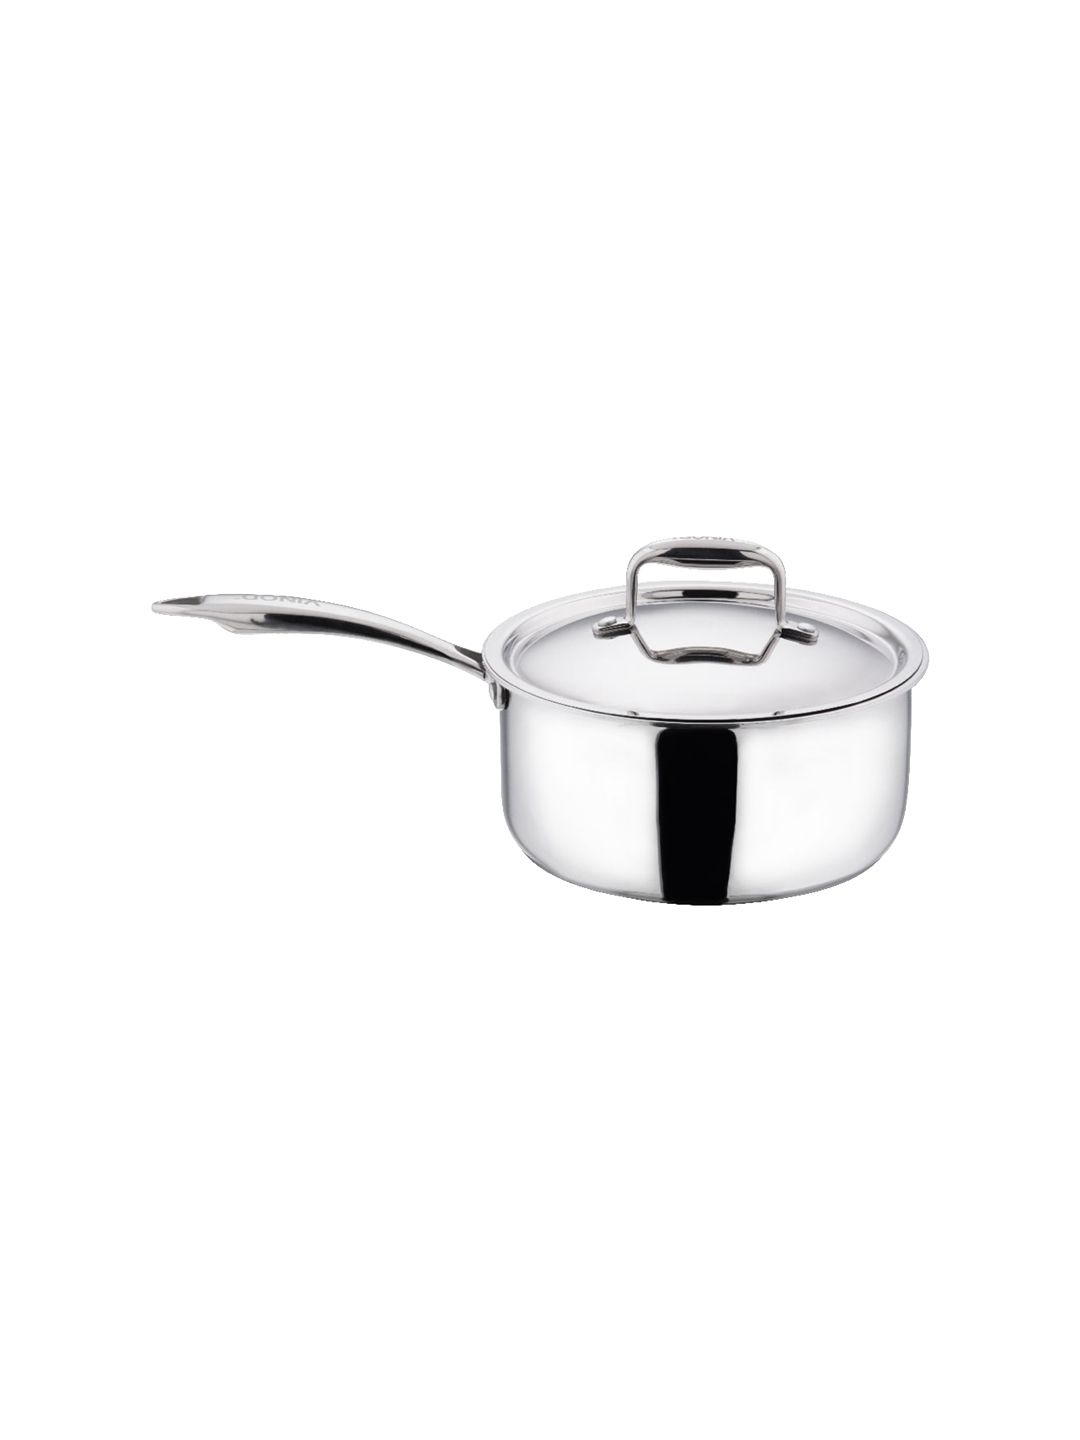 Vinod Silver-Toned Solid Stainless Steel Sauce Pan With Lid 2.25 Ltr Price in India